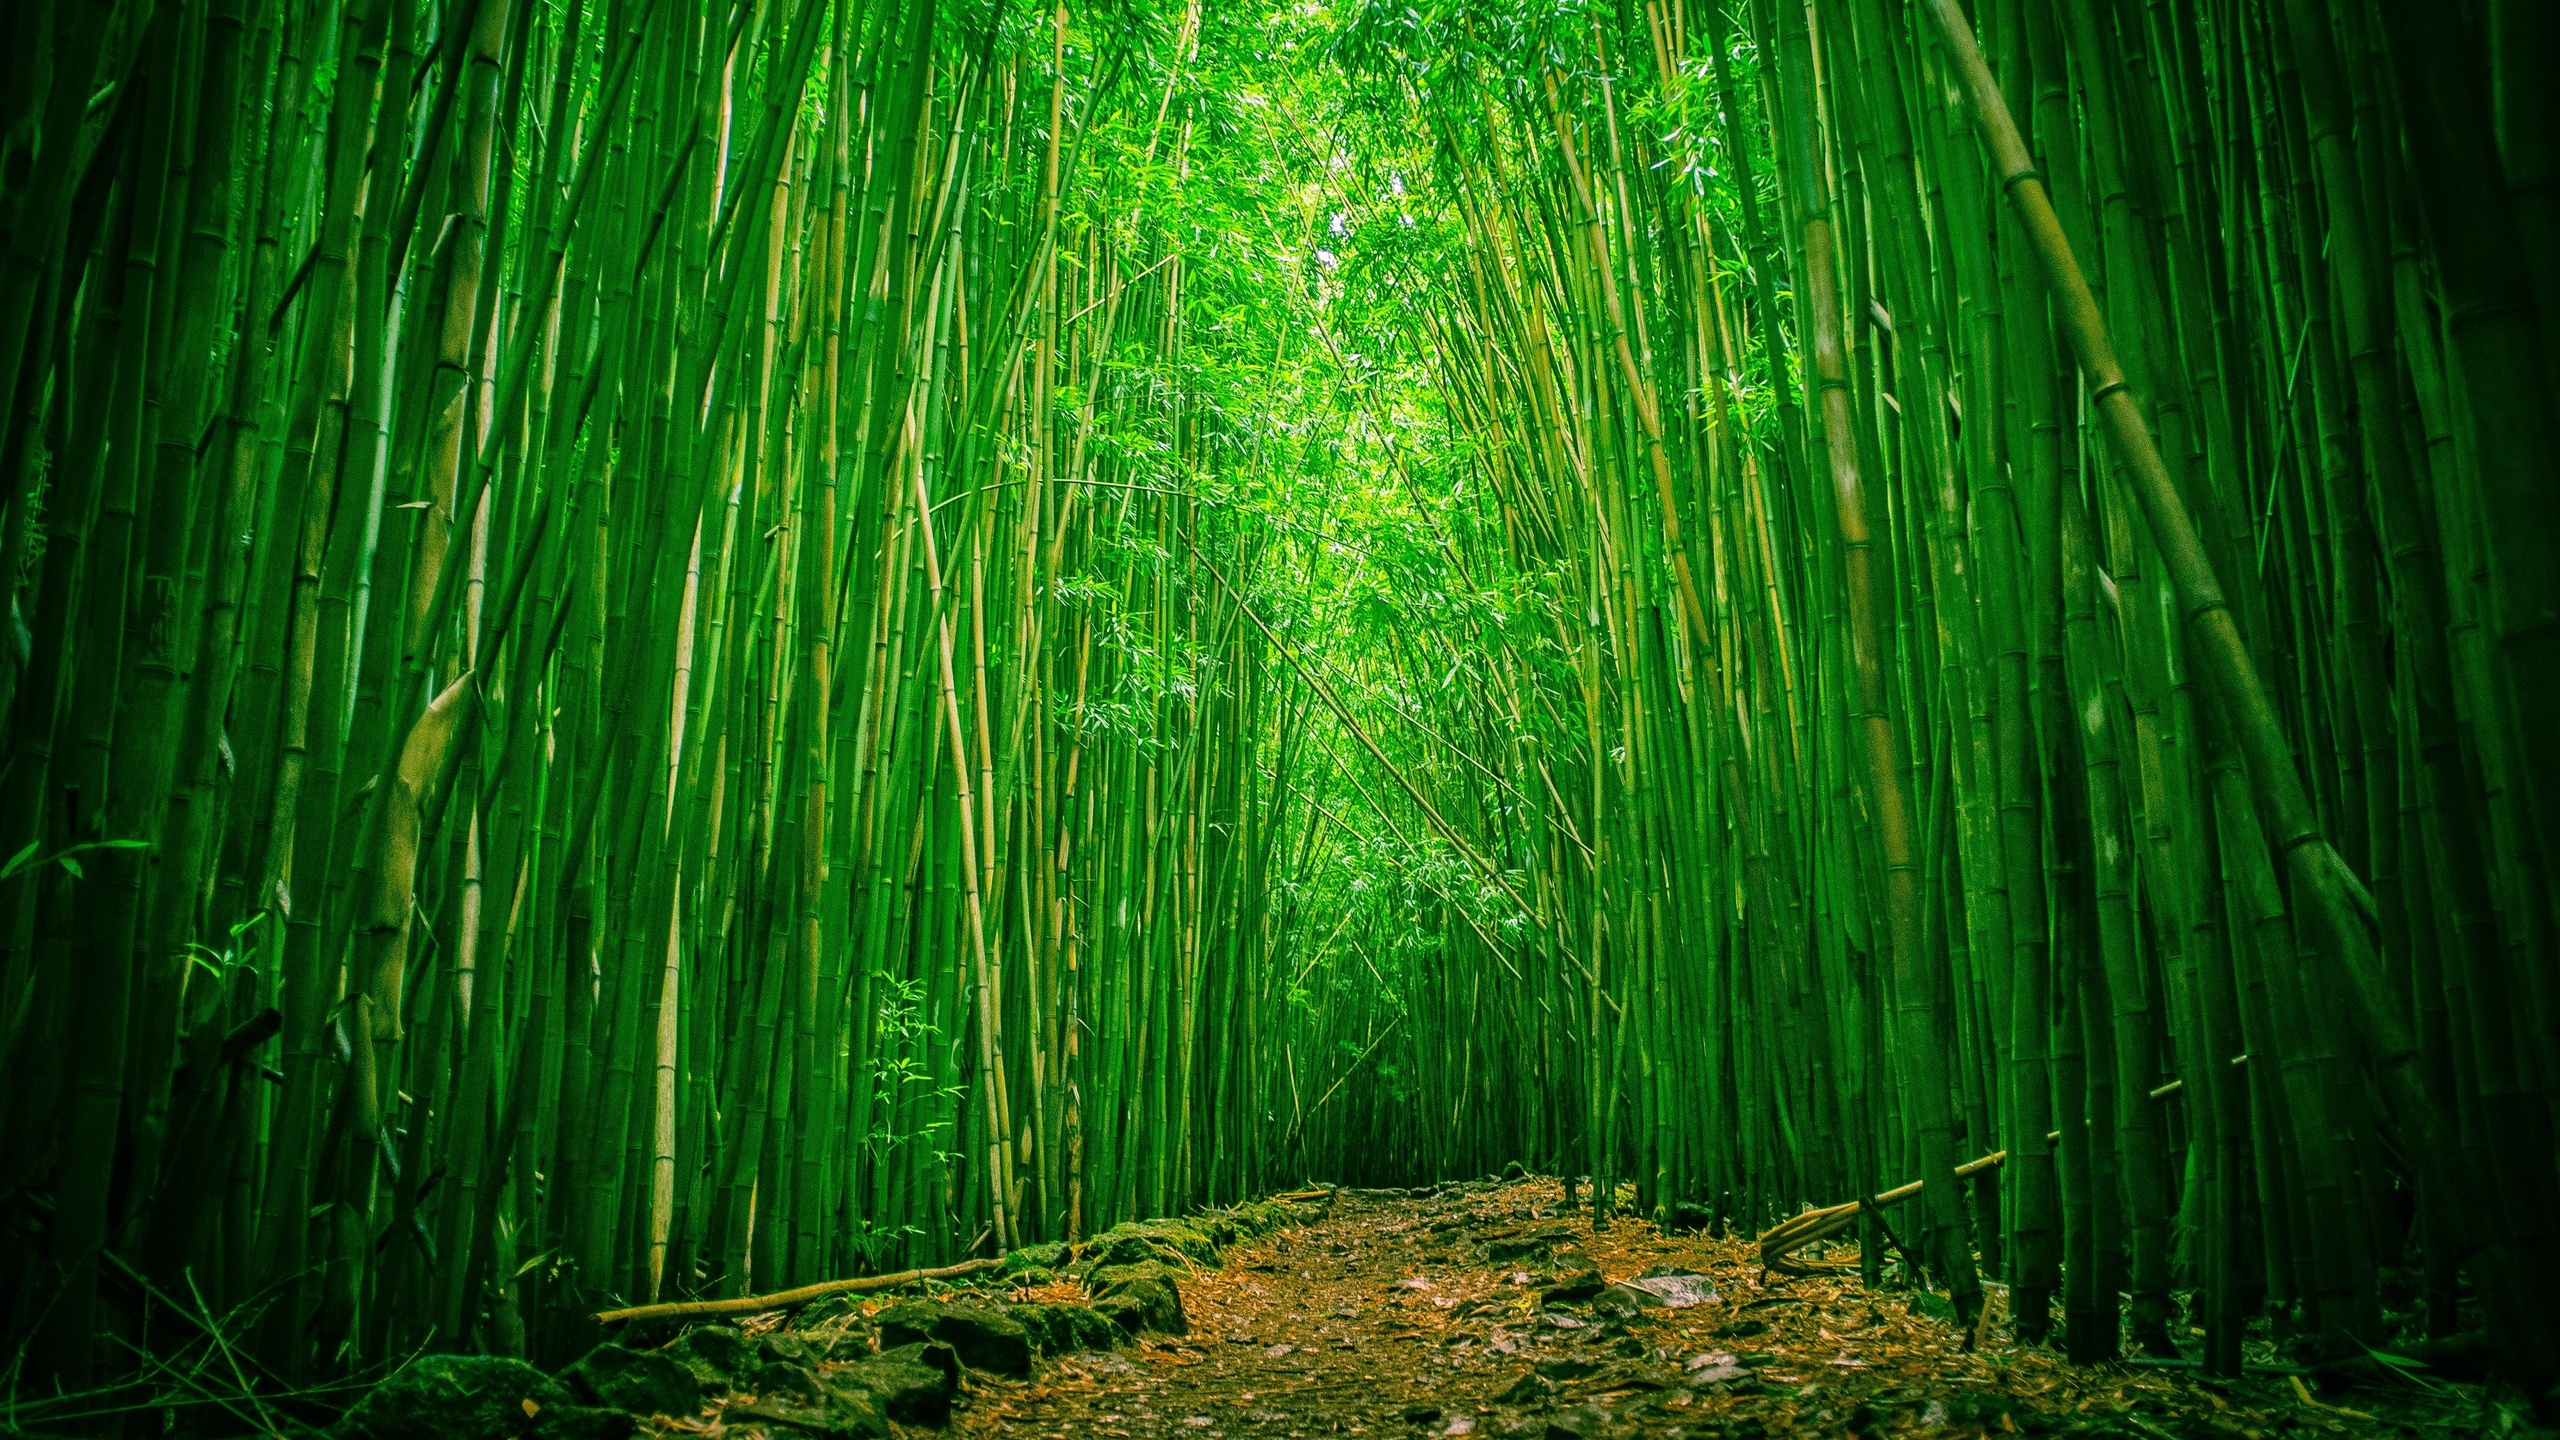 Free Download Green Bamboo Forest Cool Wallpapers 2560x1440 For Your Desktop Mobile Tablet Explore 75 Green Bamboo Wallpaper Bamboo Wallpaper Wall Coverings Bamboo Wallpaper For Walls Wallpaper Bamboo Pattern